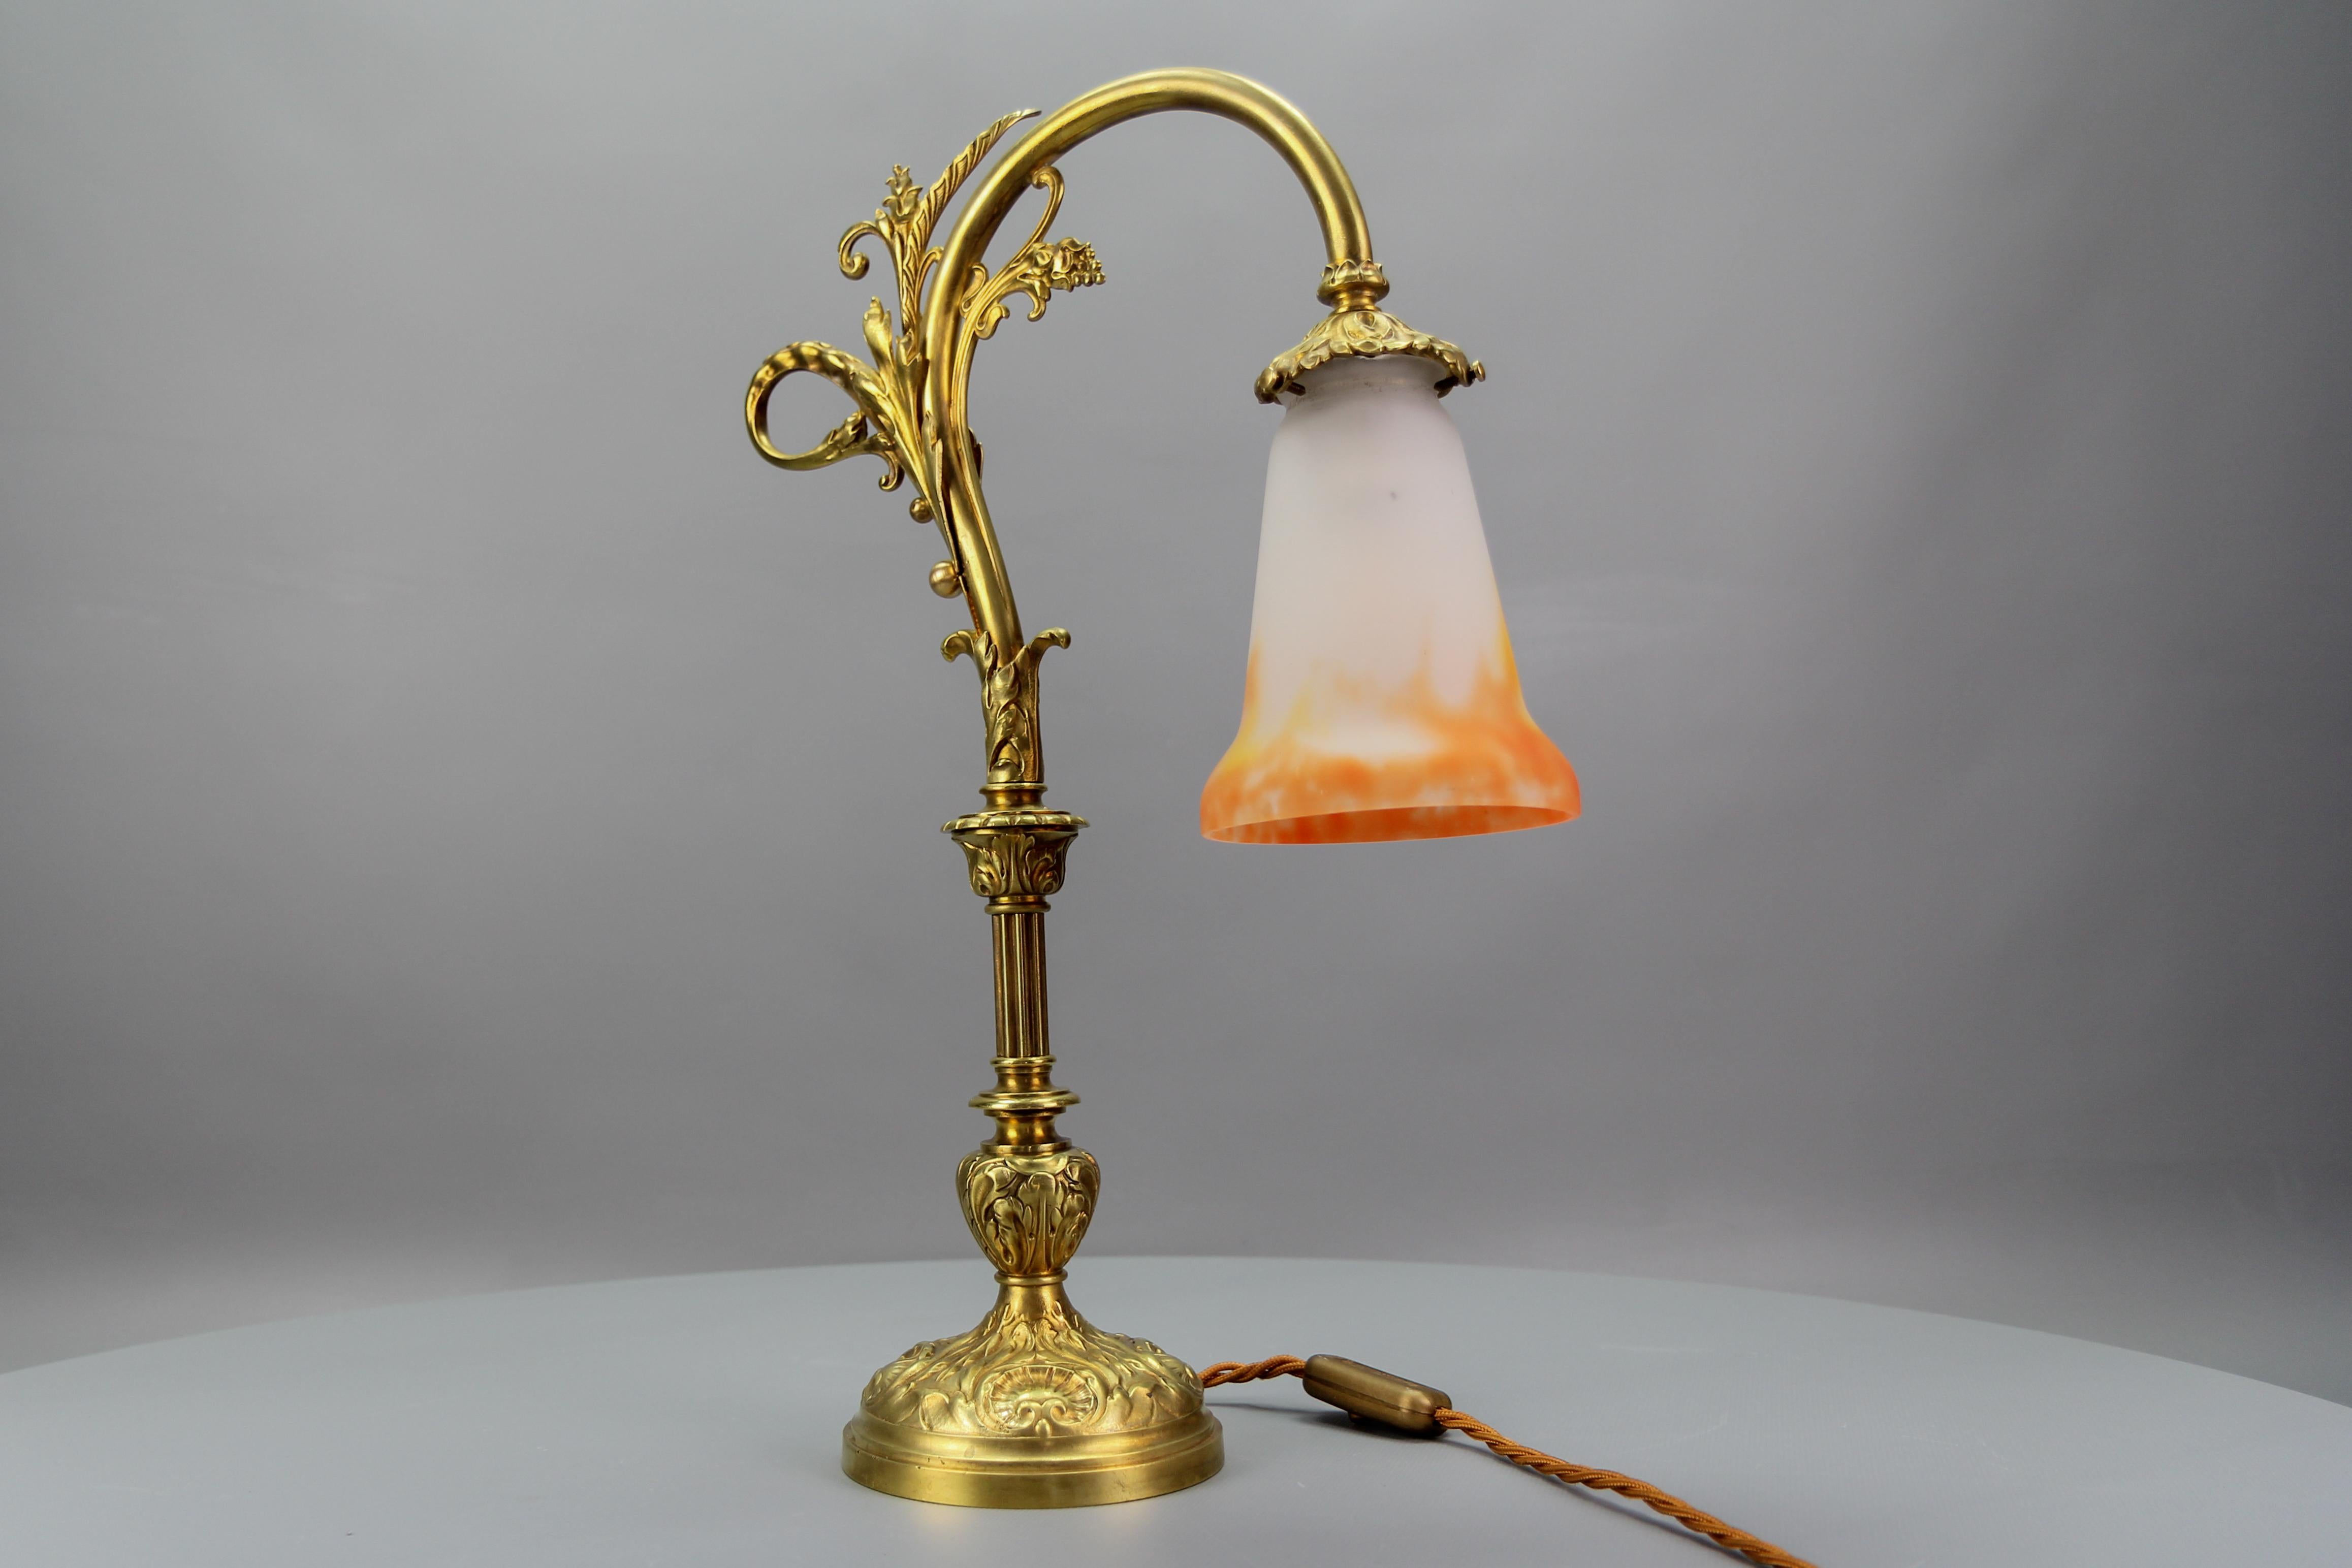 French Art Nouveau bronze table lamp with glass shade signed GV de Croismare, from circa the 1920s.
An adorable and large French bronze table lamp adorned with acanthus leaf scrolls and Rococo shell motifs.
Beautiful glass lampshade by G.V. de